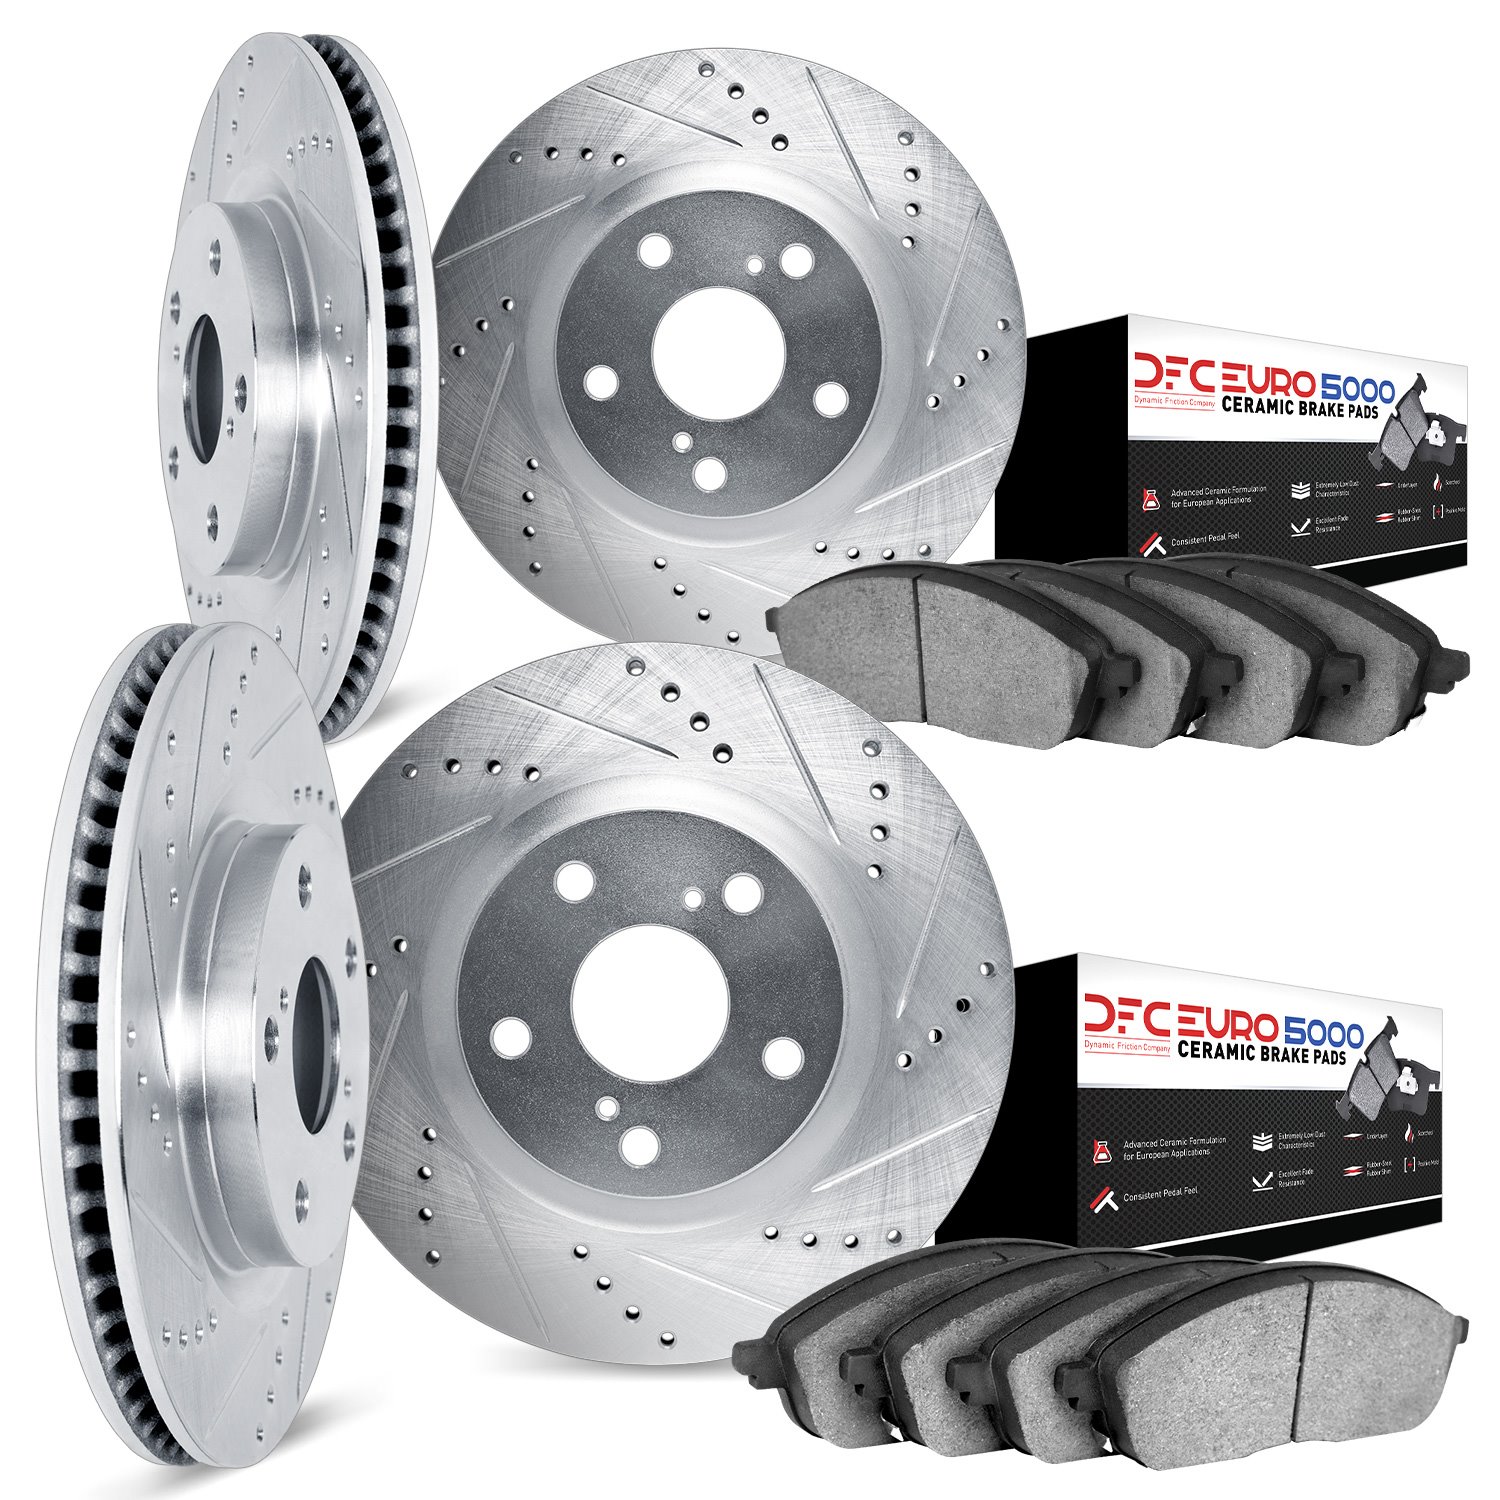 7604-02004 Drilled/Slotted Brake Rotors w/5000 Euro Ceramic Brake Pads Kit [Silver], 1987-1995 Porsche, Position: Front and Rear